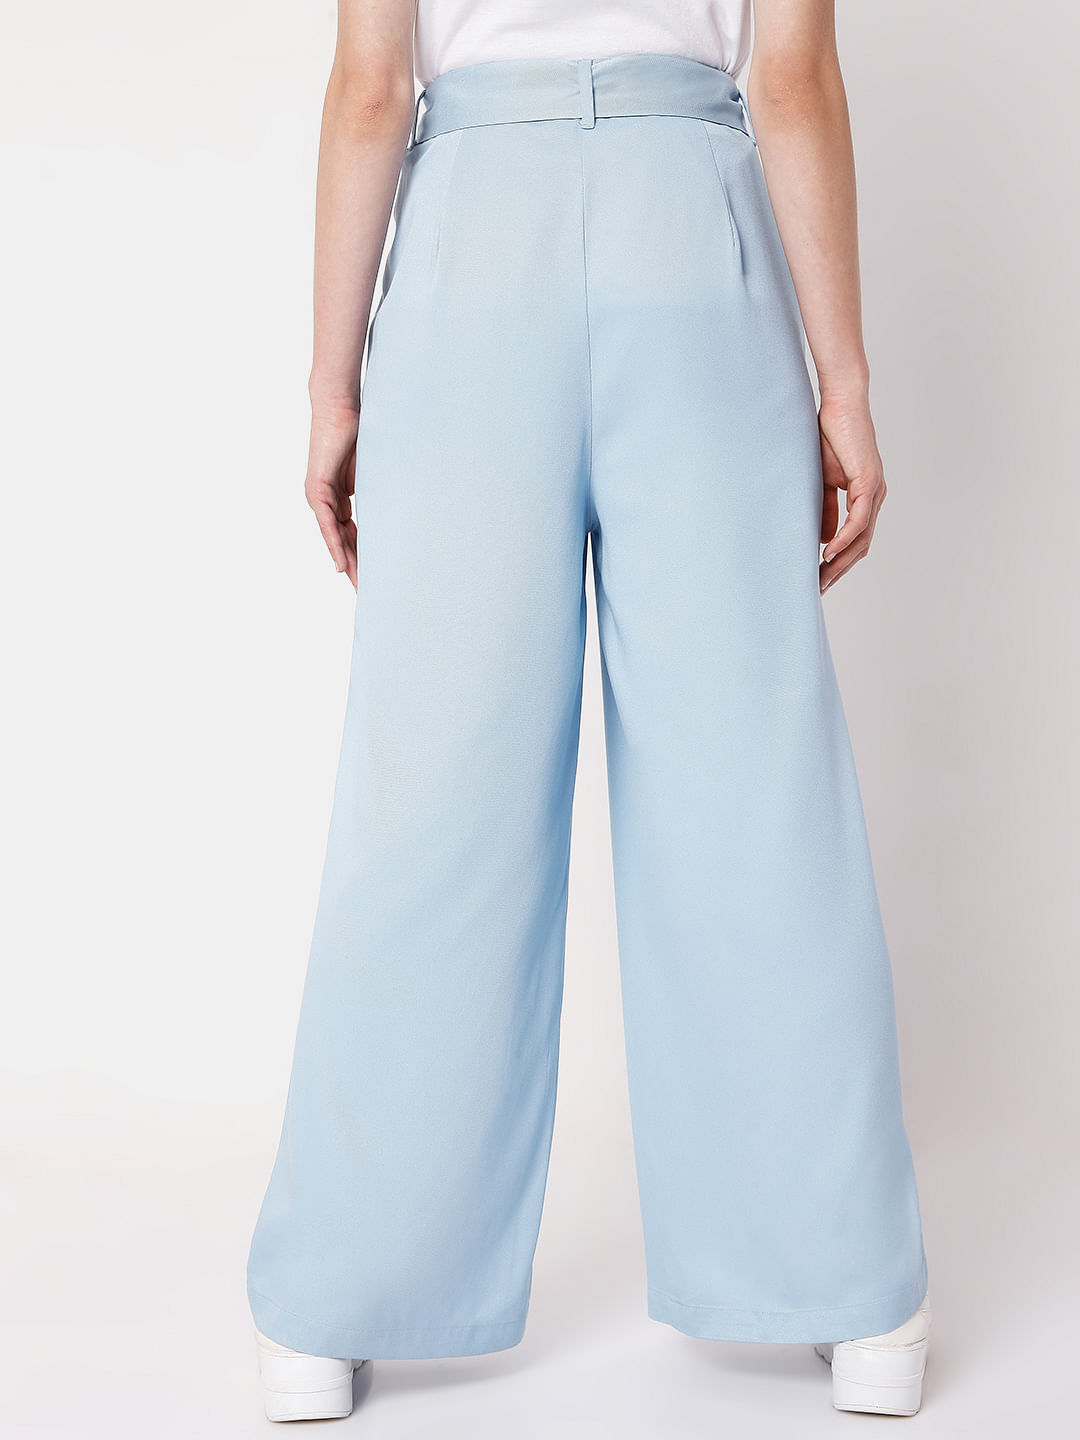 Add an Elastic Waist to Tailored Trousers for Extra Comfort - Threads